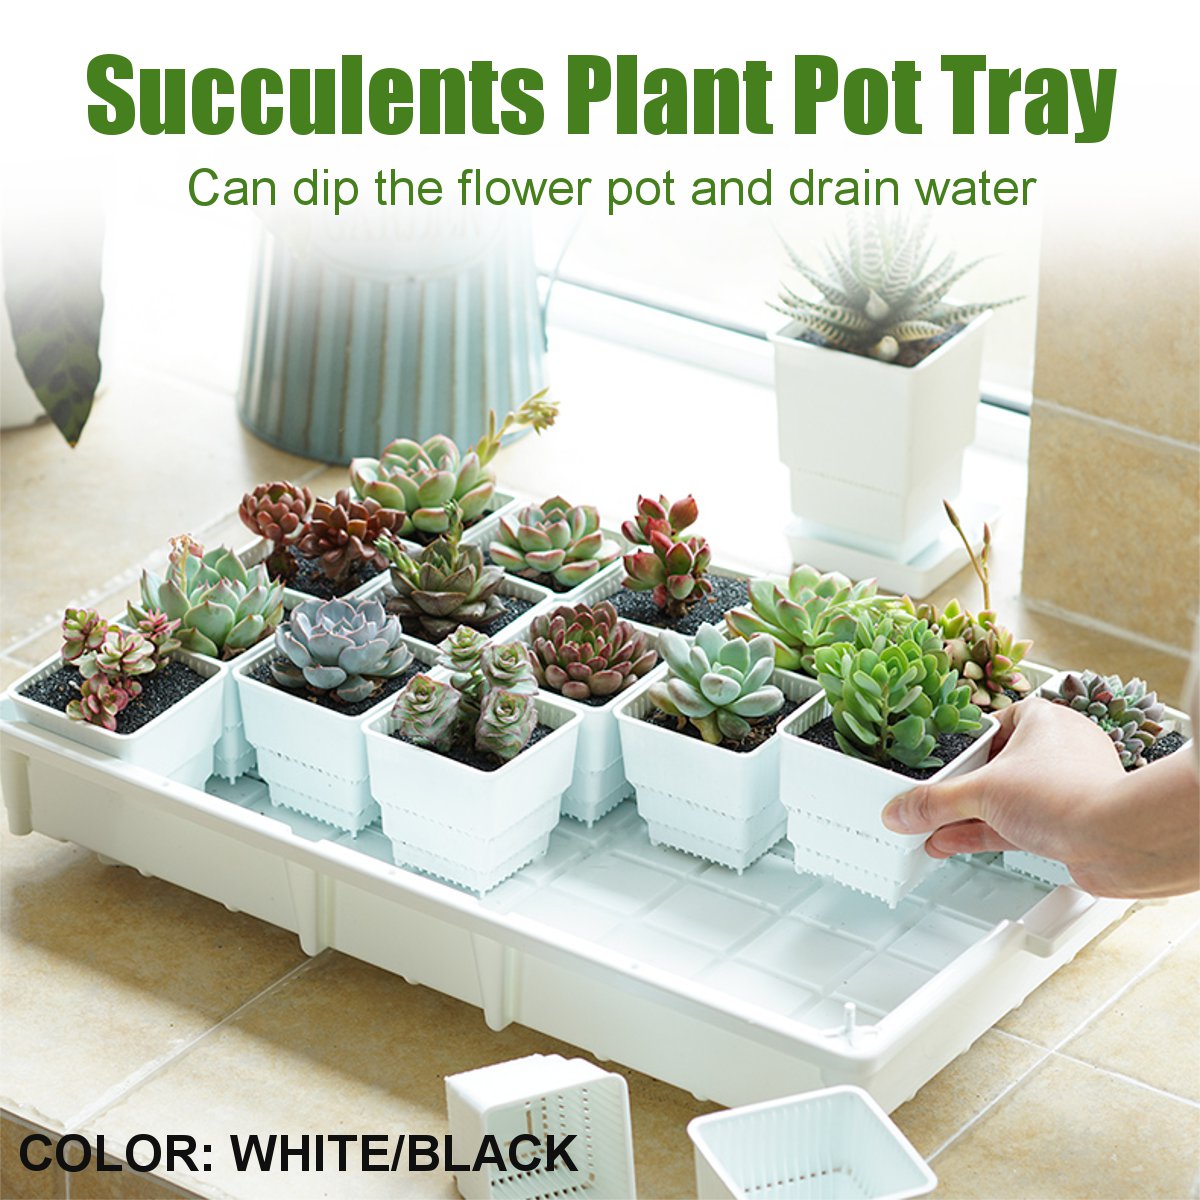 PP-Plant-Tray-Succulents-Seedling-Drain-Balcony-Growing-Holder-Nursery-Garden-Decorations-1581228-1